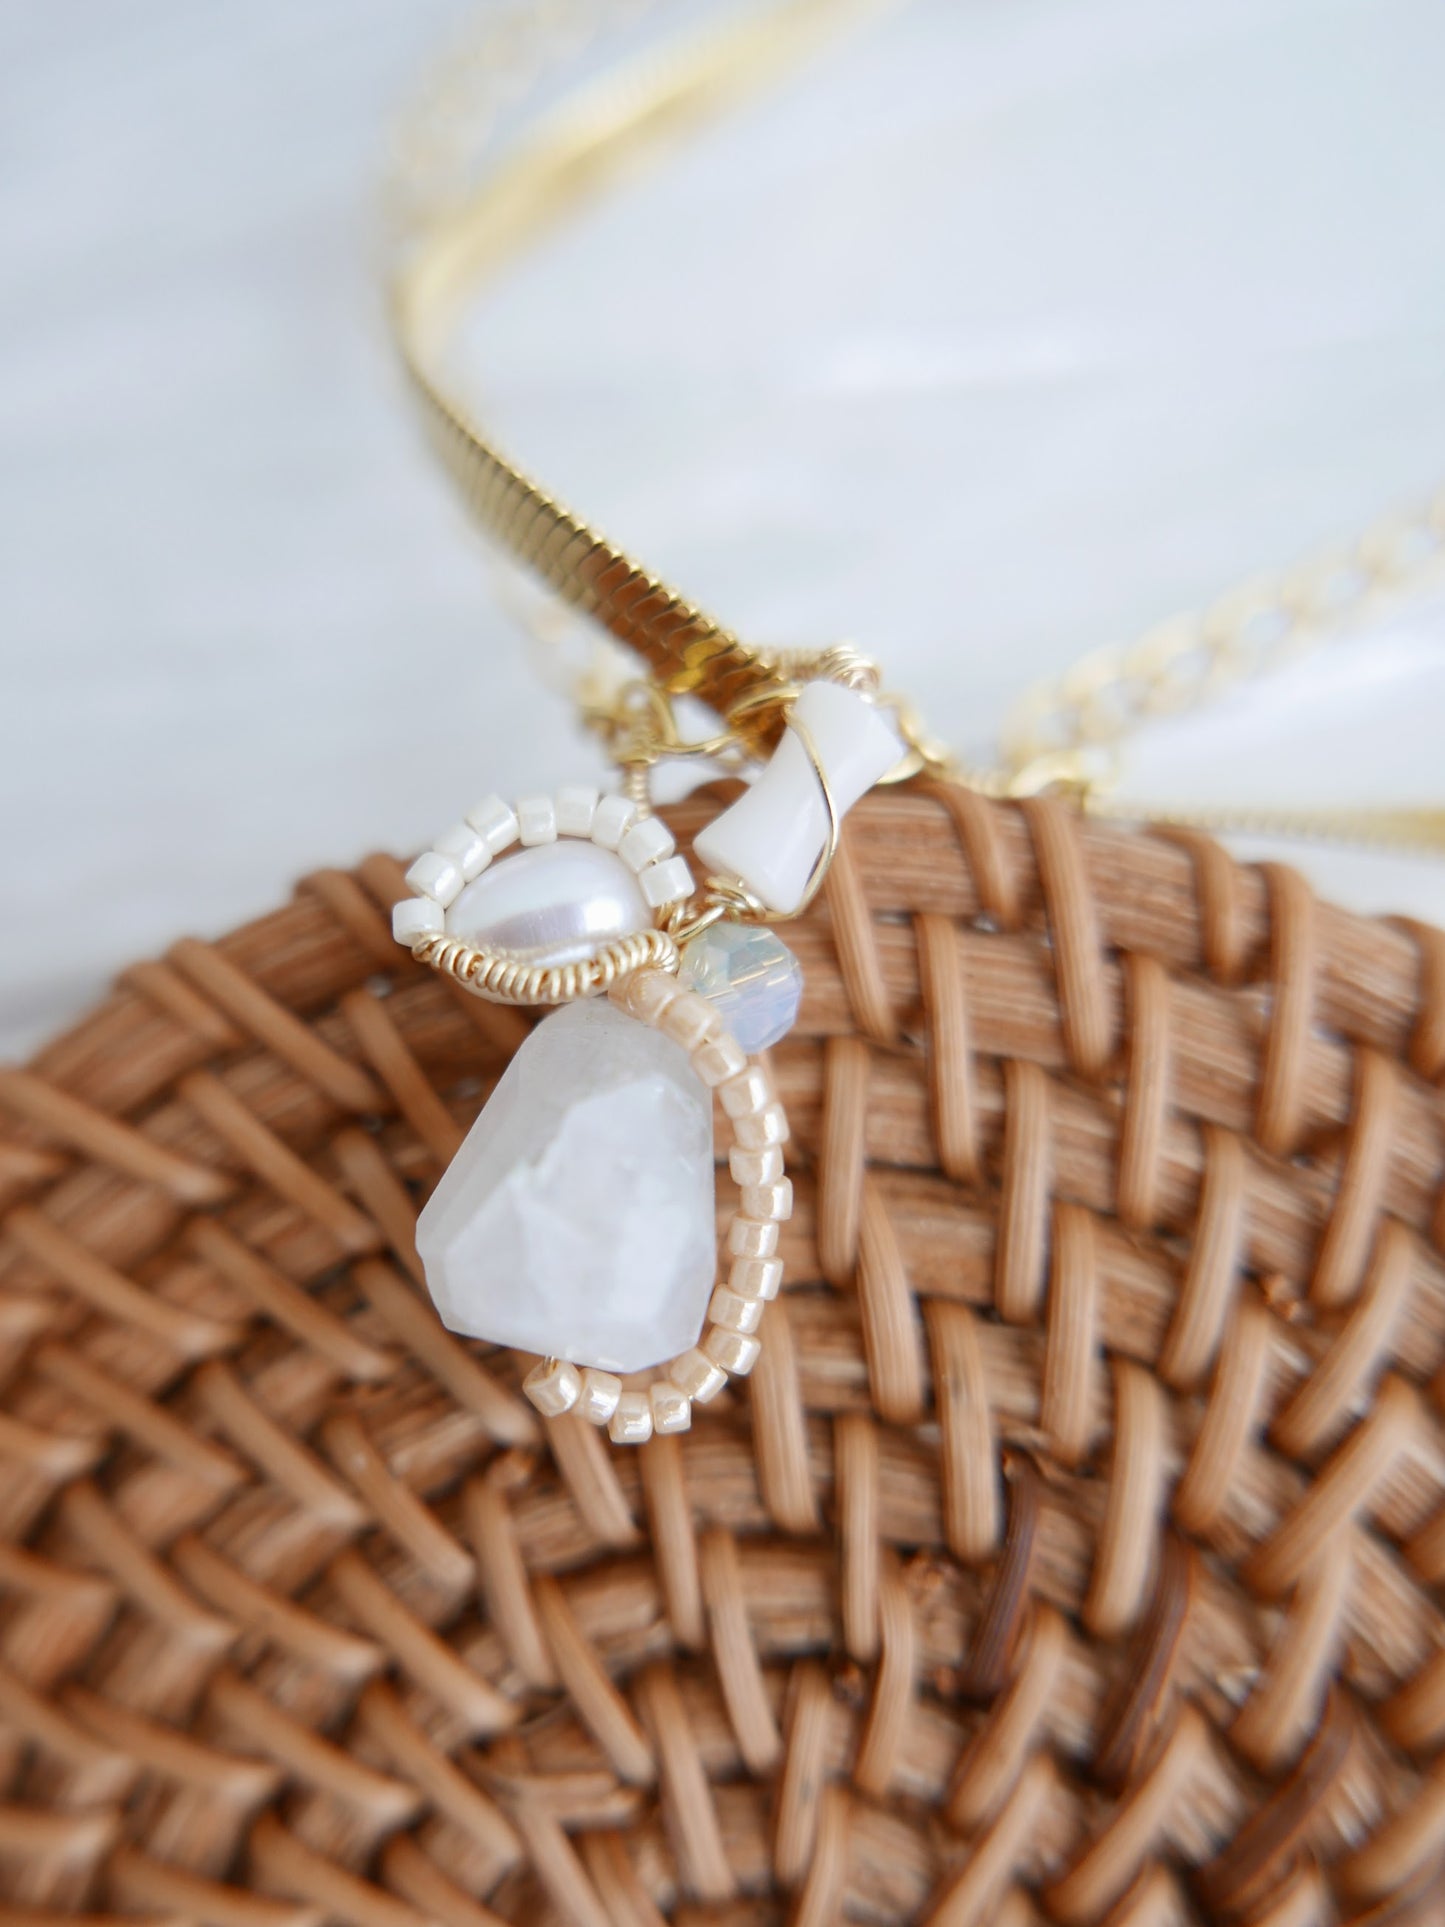 Out of the Ground Necklace - White